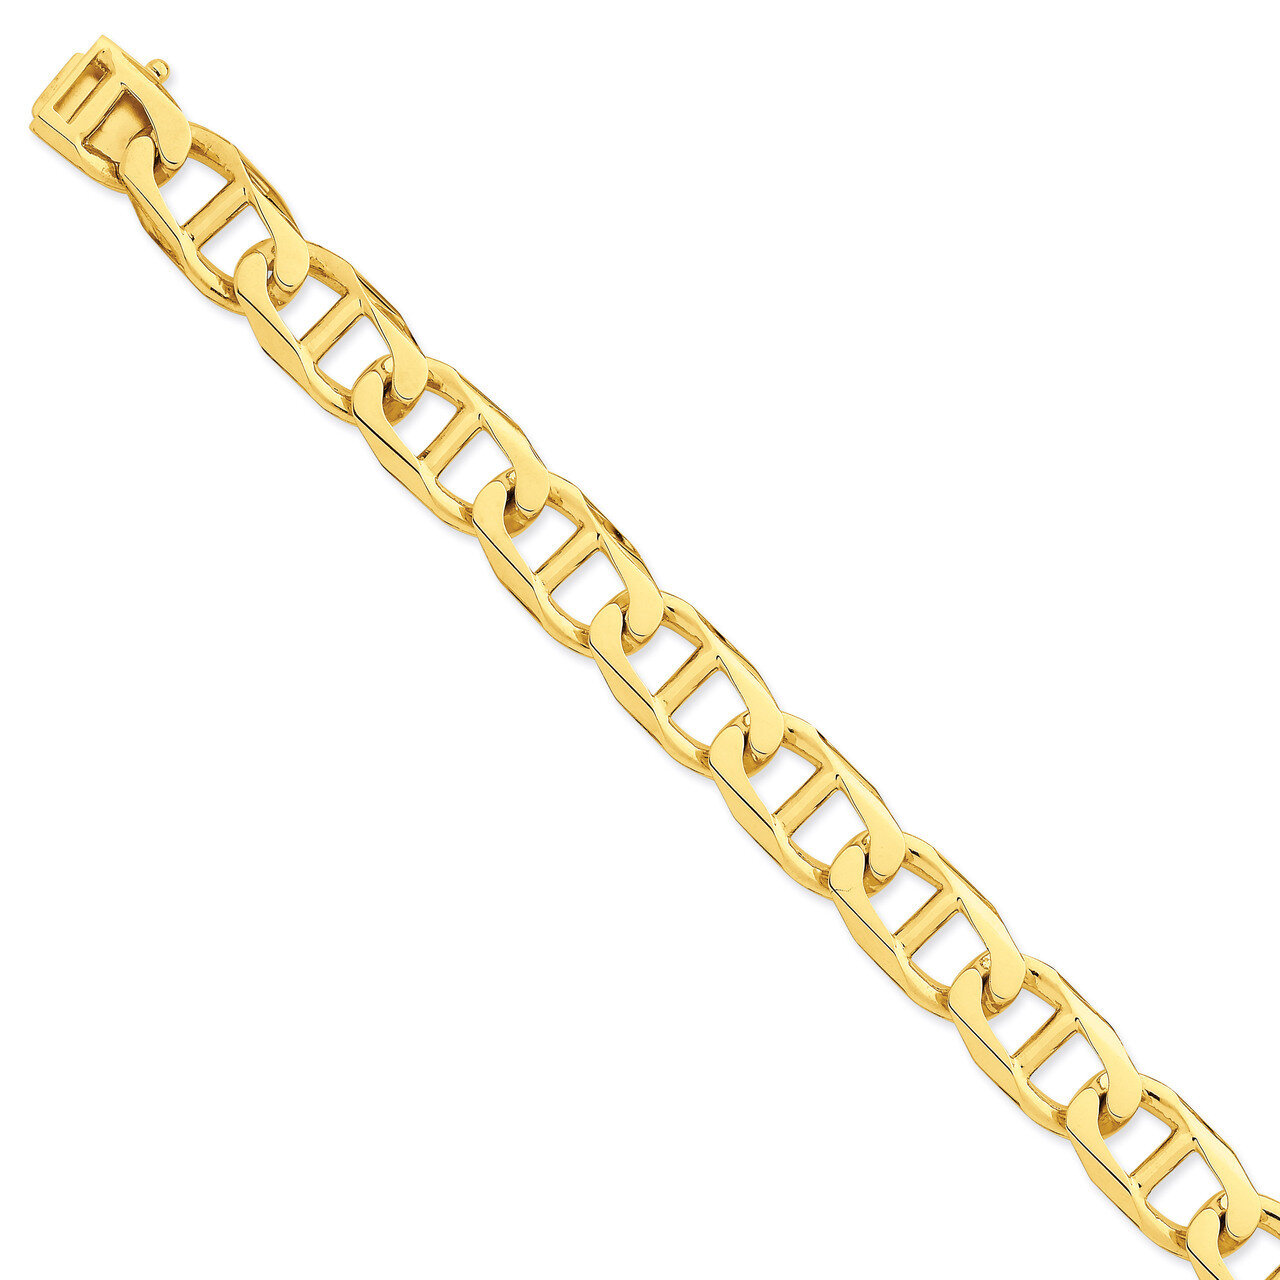 13mm Hand-Polished Anchor Link Chain 9 Inch 14k Gold LK103-9